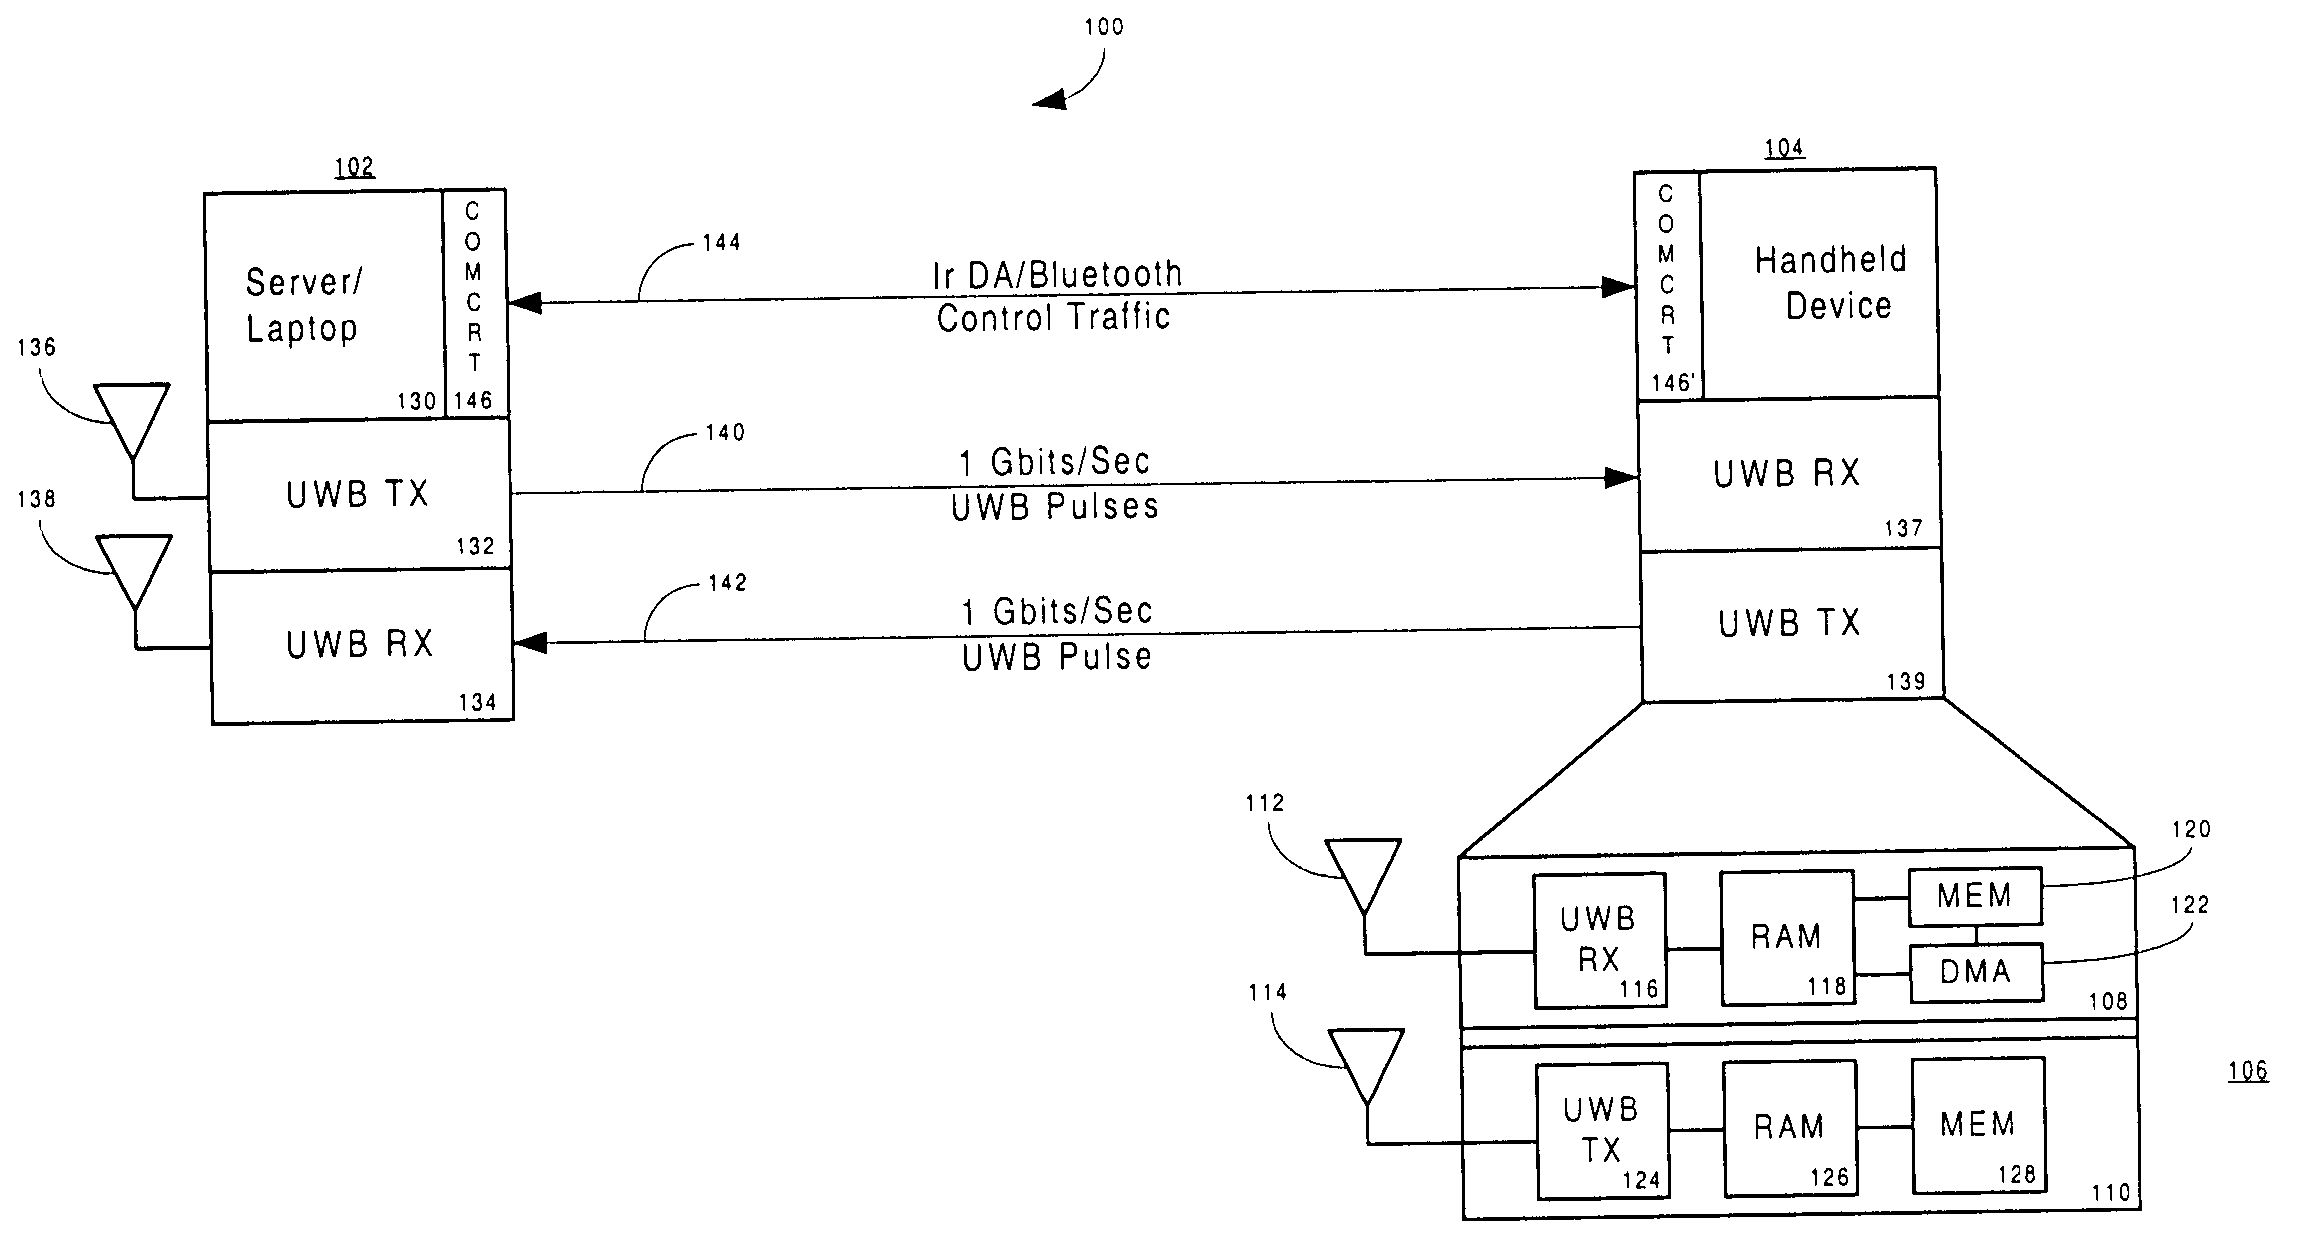 Ultra-wideband/low power communication having a dedicated memory stick for fast data downloads - apparatus, systems and methods